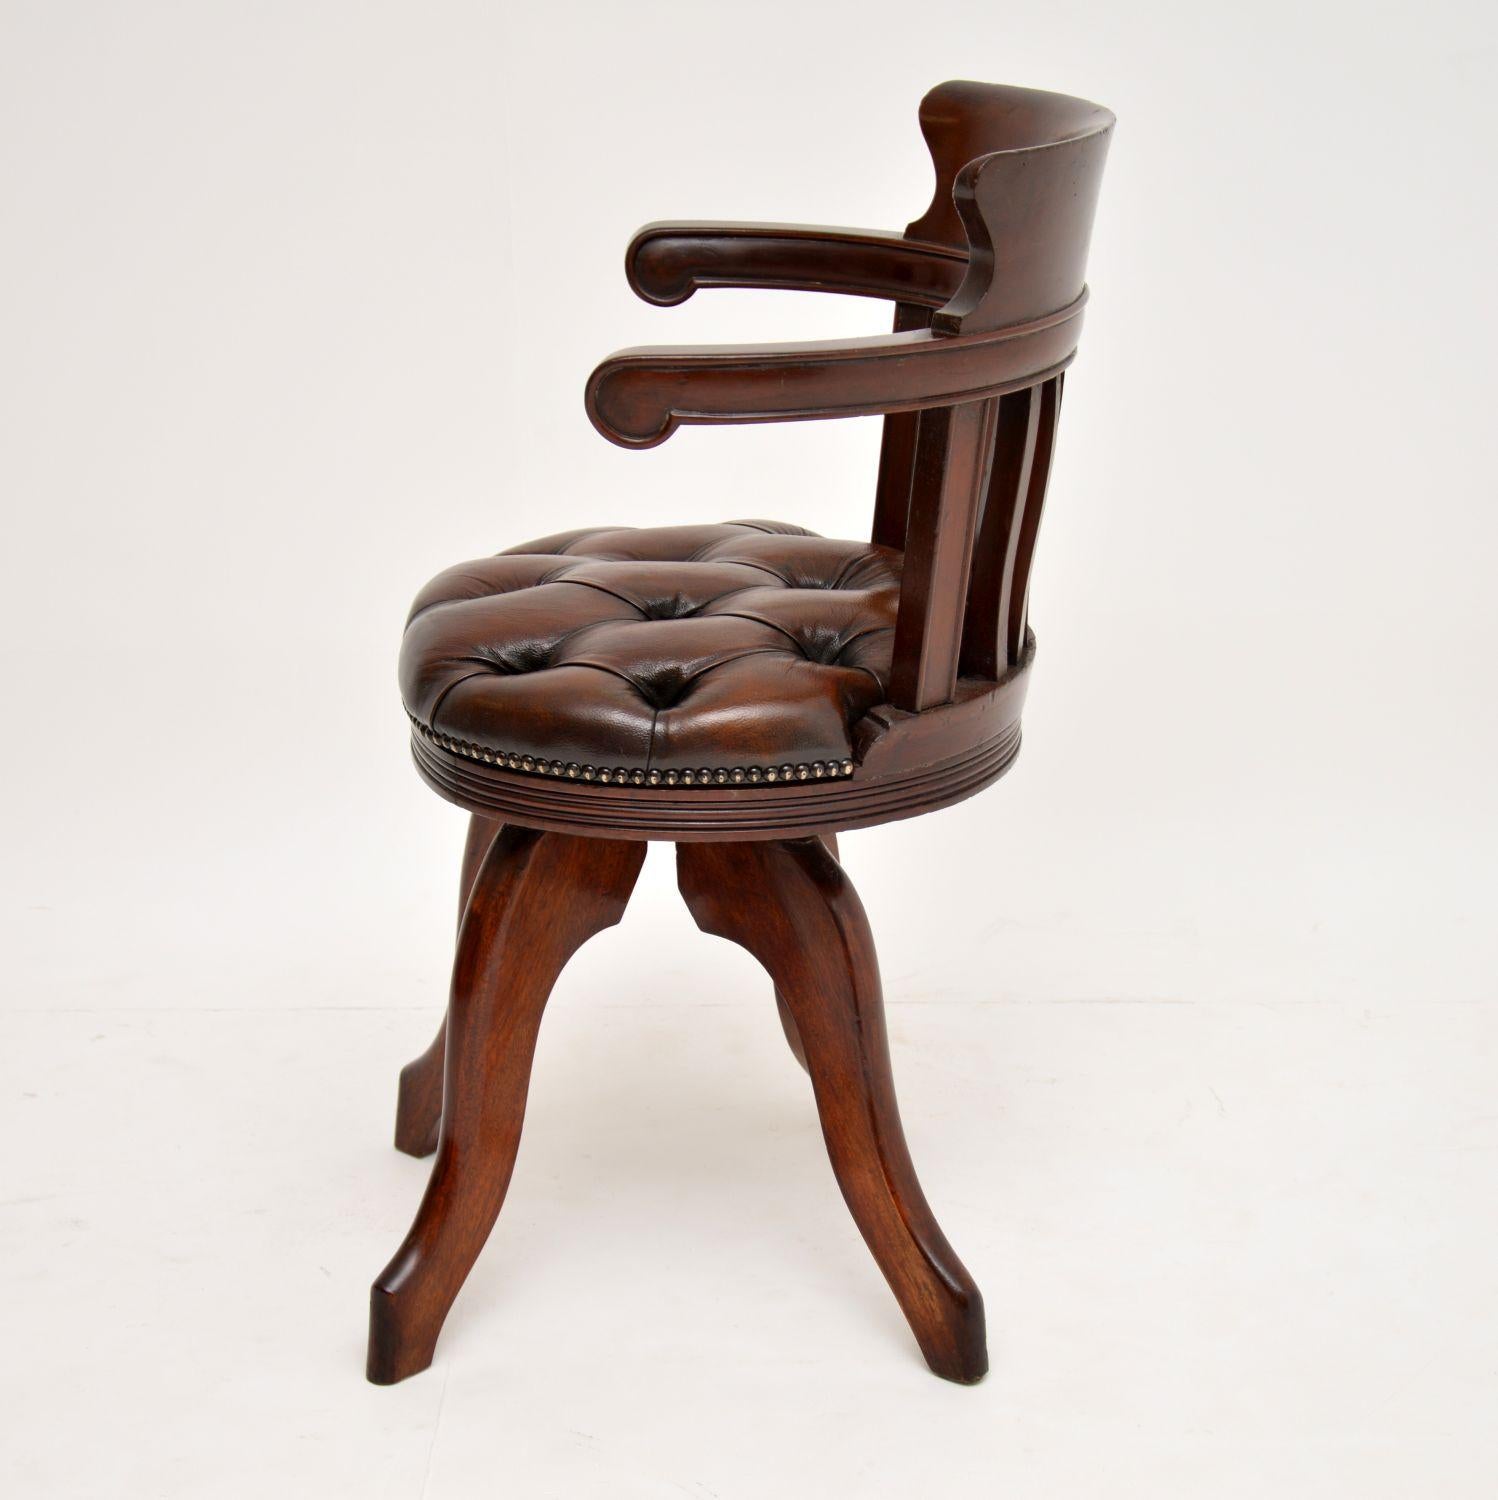 English Antique Victorian Mahogany Leather Upholstered Swivel Desk Chair